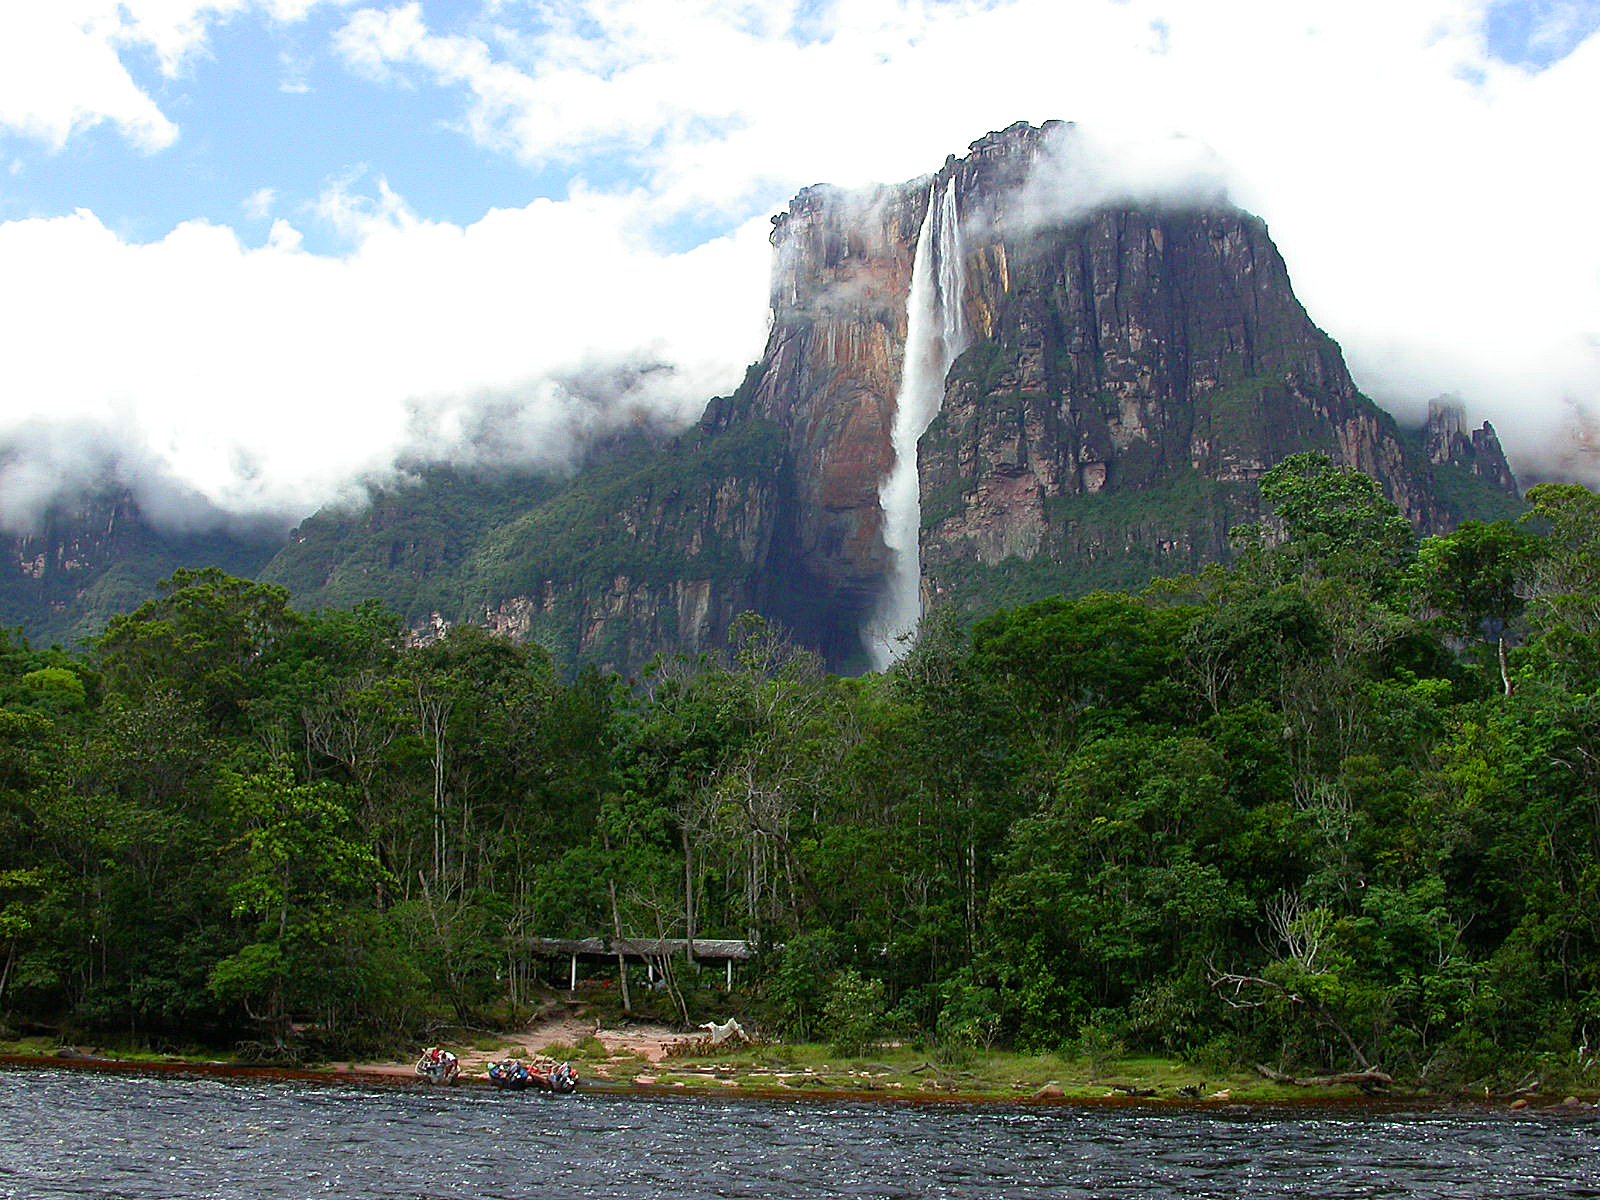 Angel Falls or Salto Angel is a waterfall that falls freely without